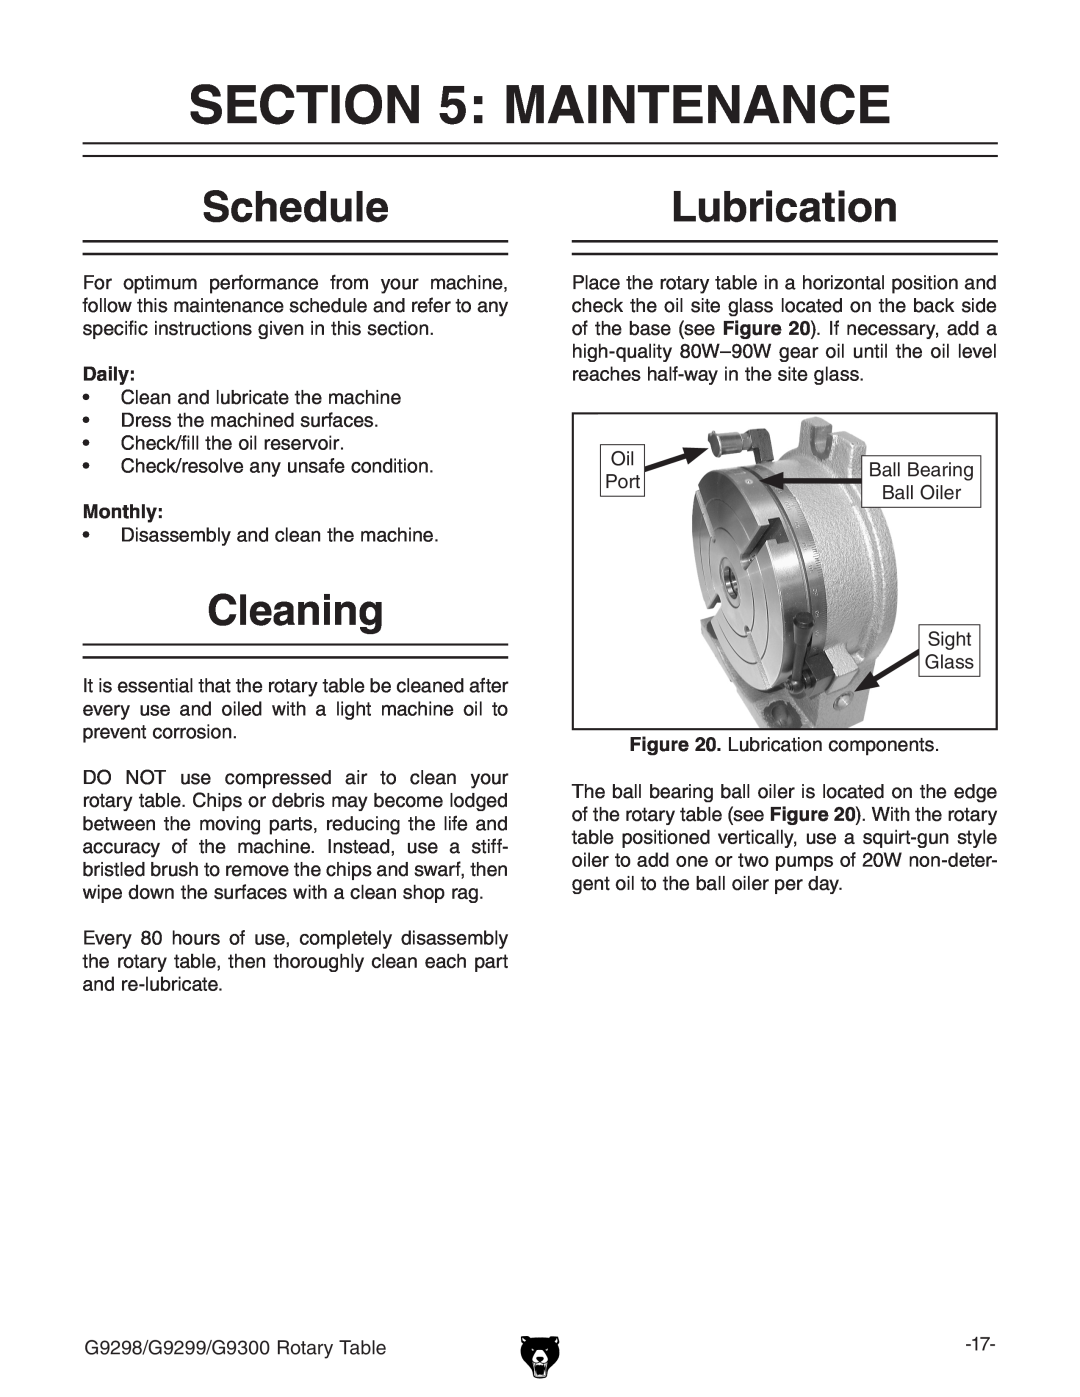 Grizzly G9298 owner manual Maintenance, Schedule, Cleaning, Lubrication, Daily, Monthly 